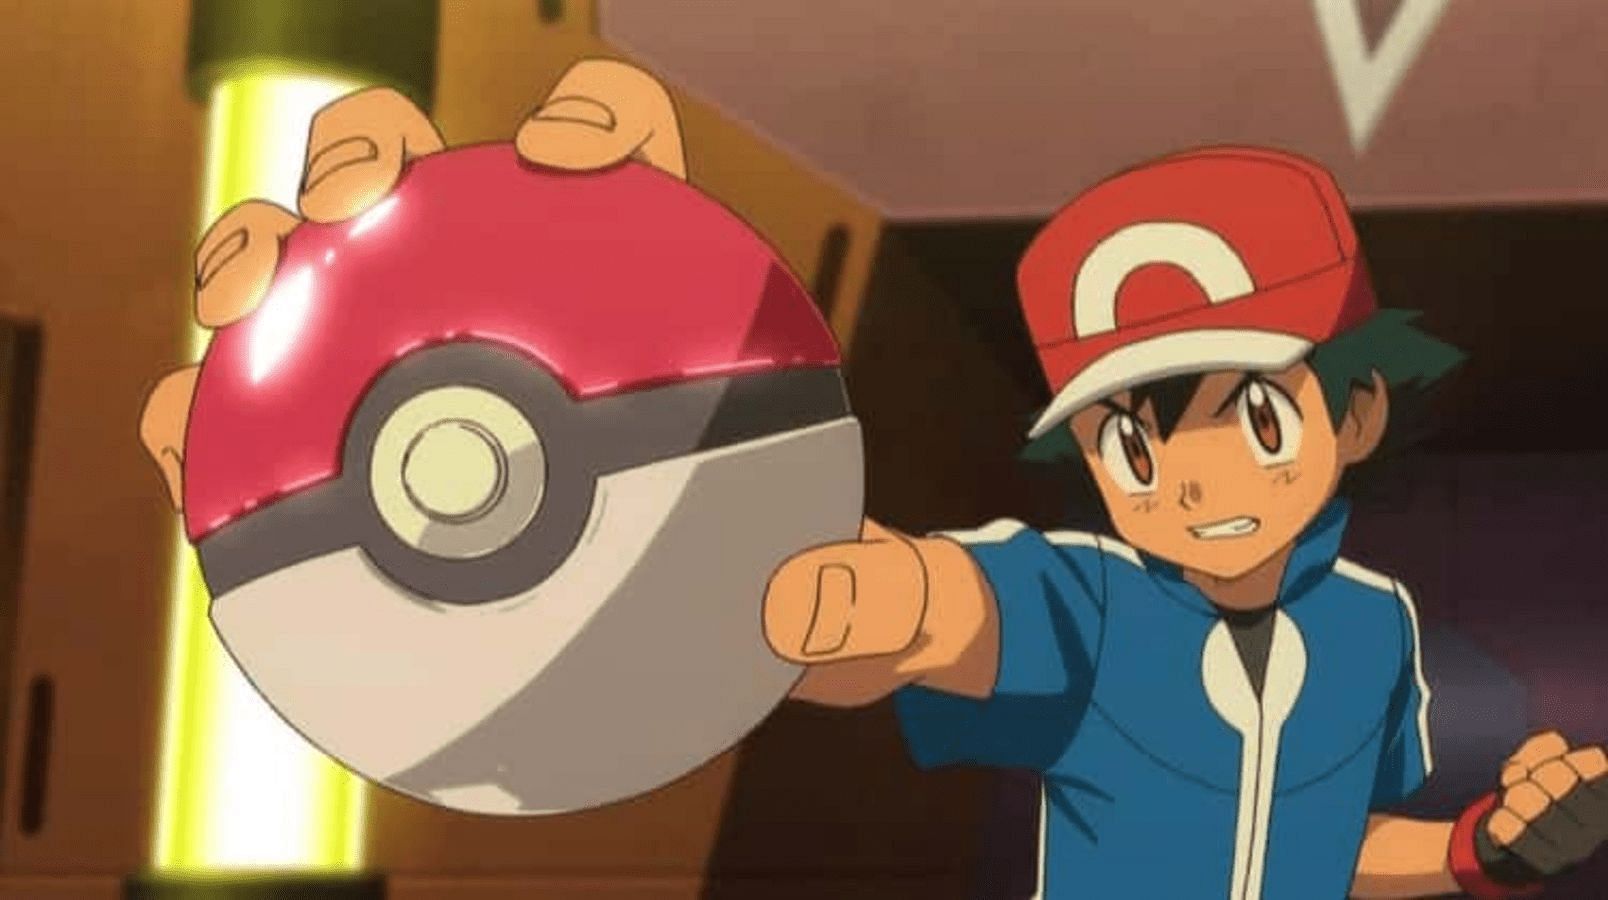 Pokeballs are certainly the most recognizable anime items in the whole world(image via Studio OLM)